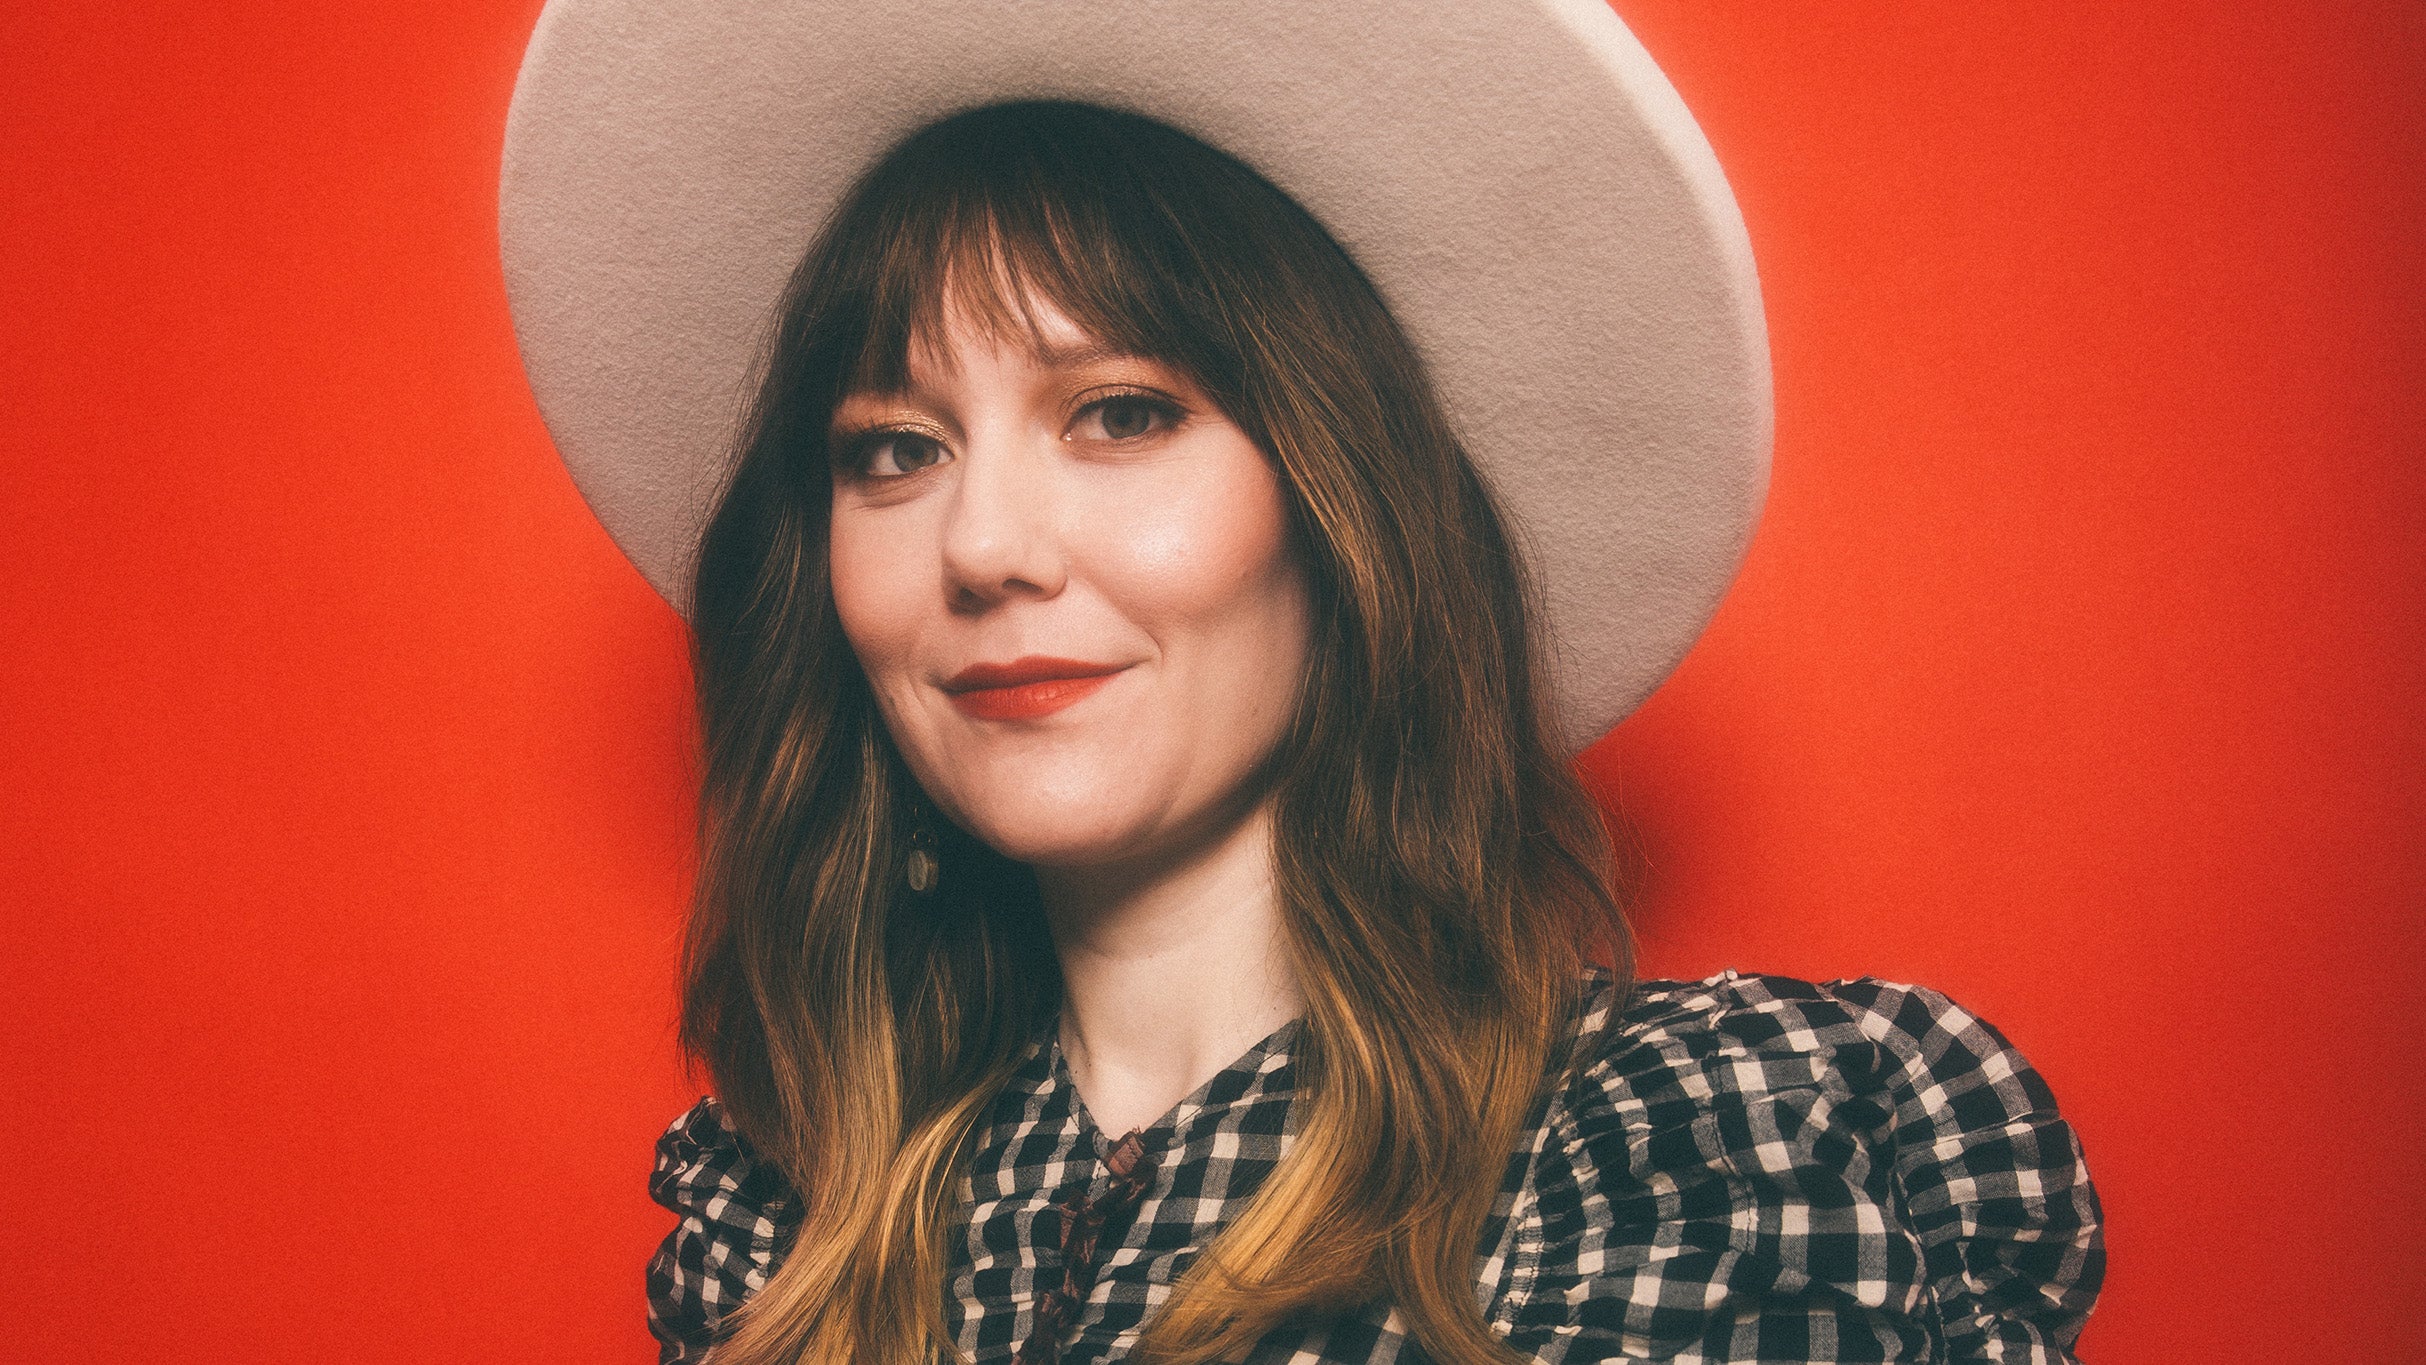 Molly Tuttle & Golden Highway - Down The Rabbit Hole Tour presales in Fort Worth